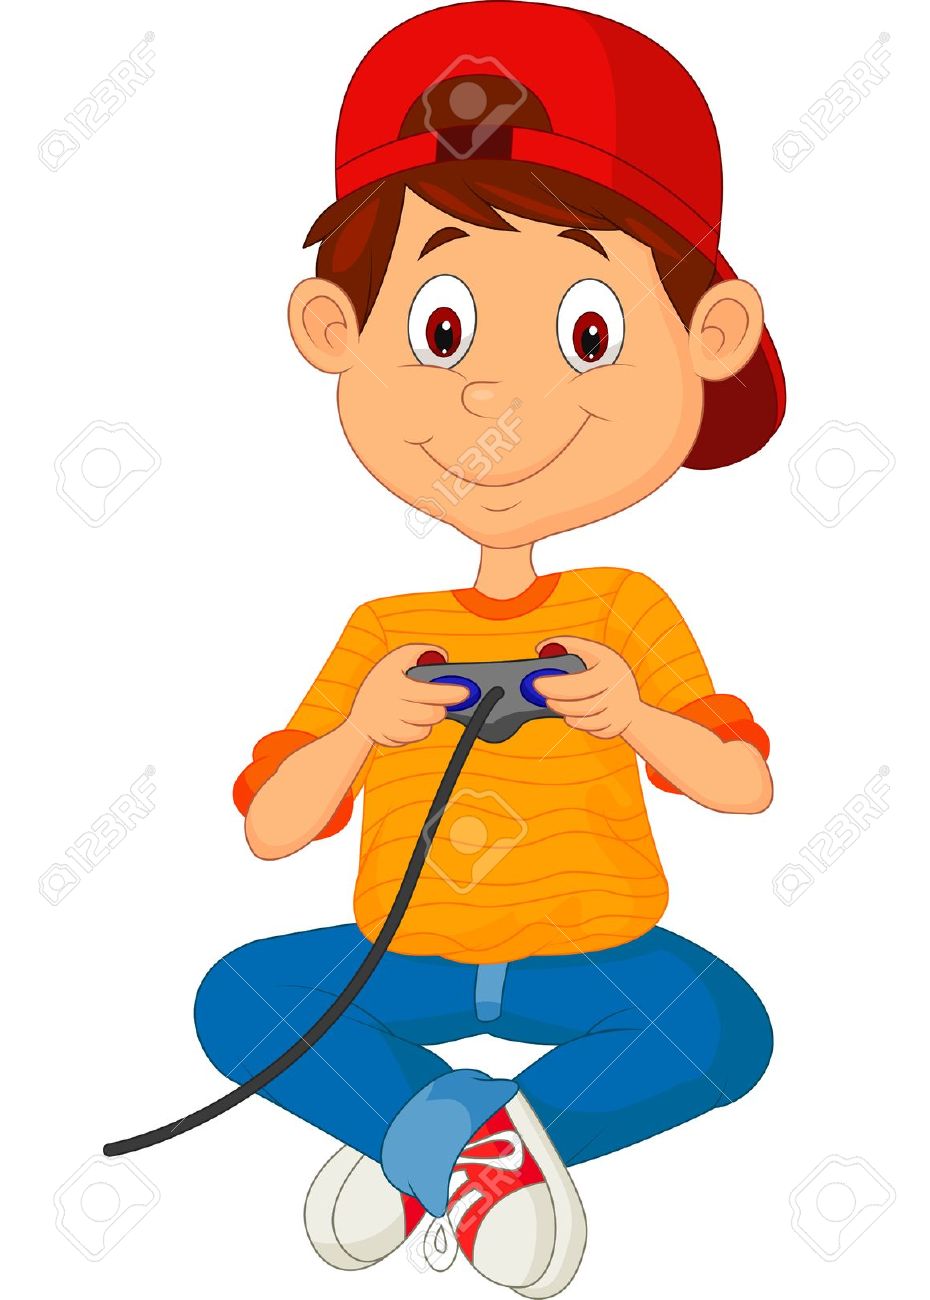 girl playing video games clipart - photo #24